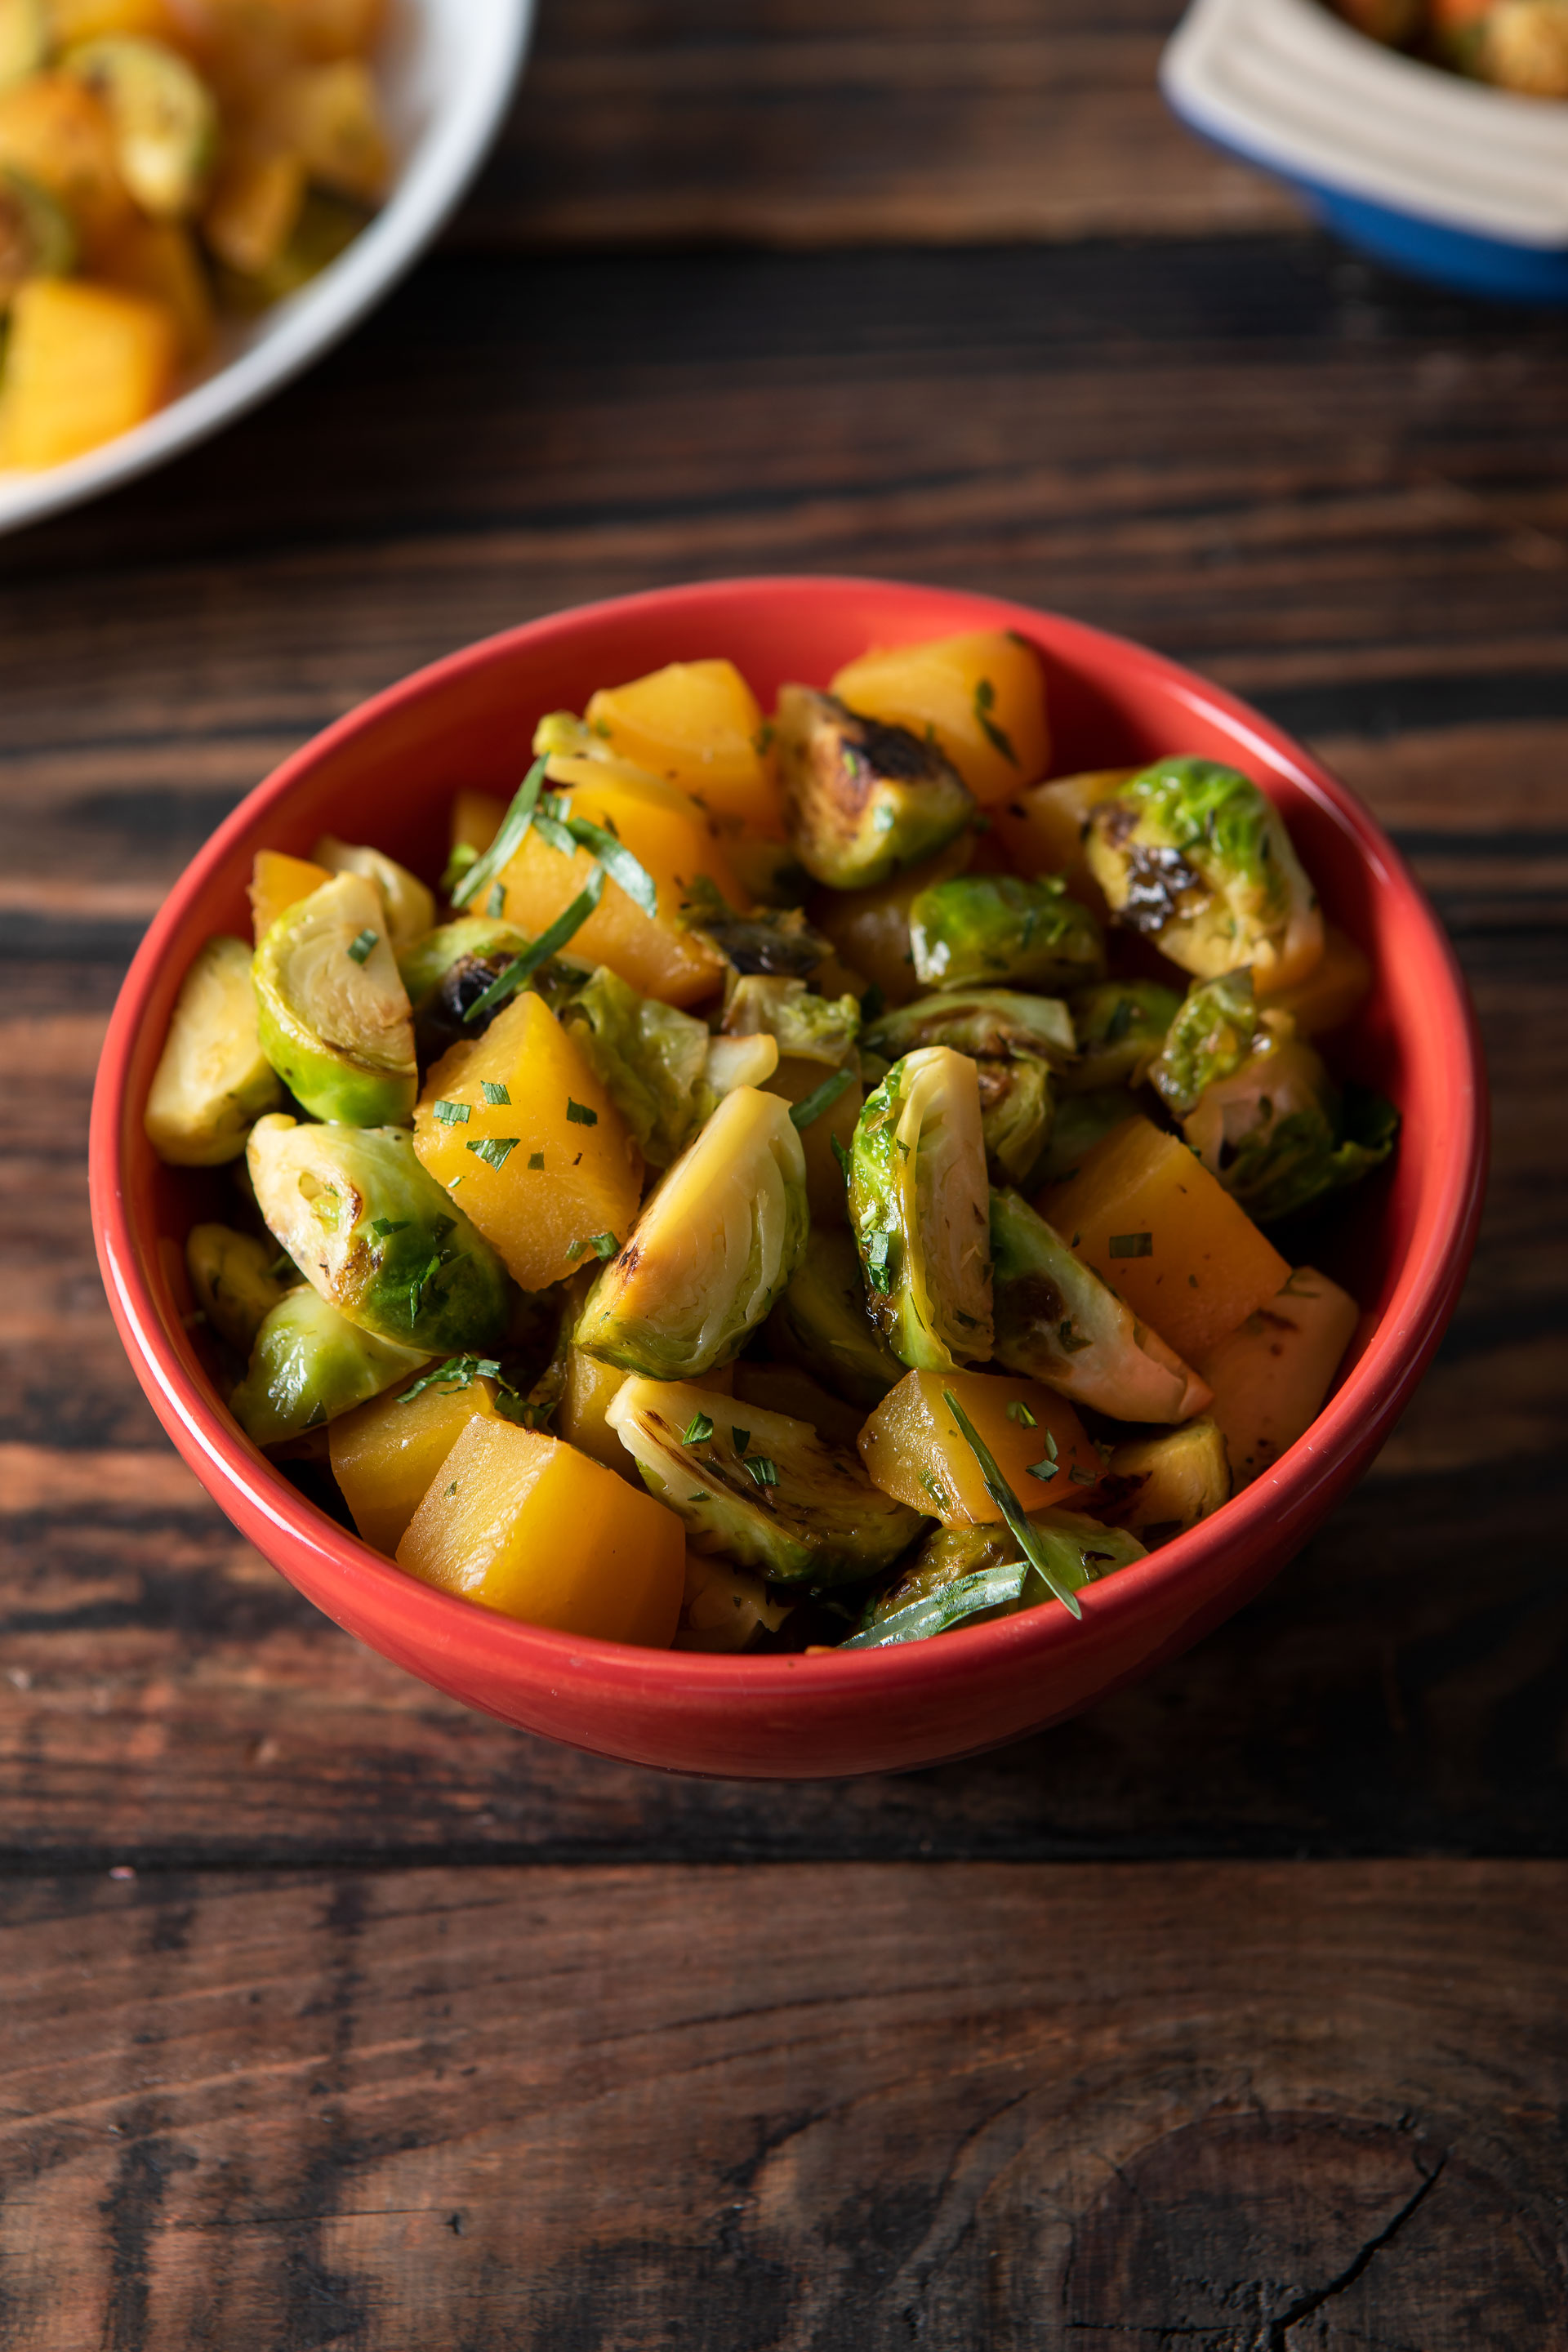 caramelized brussels sprouts with golden beets